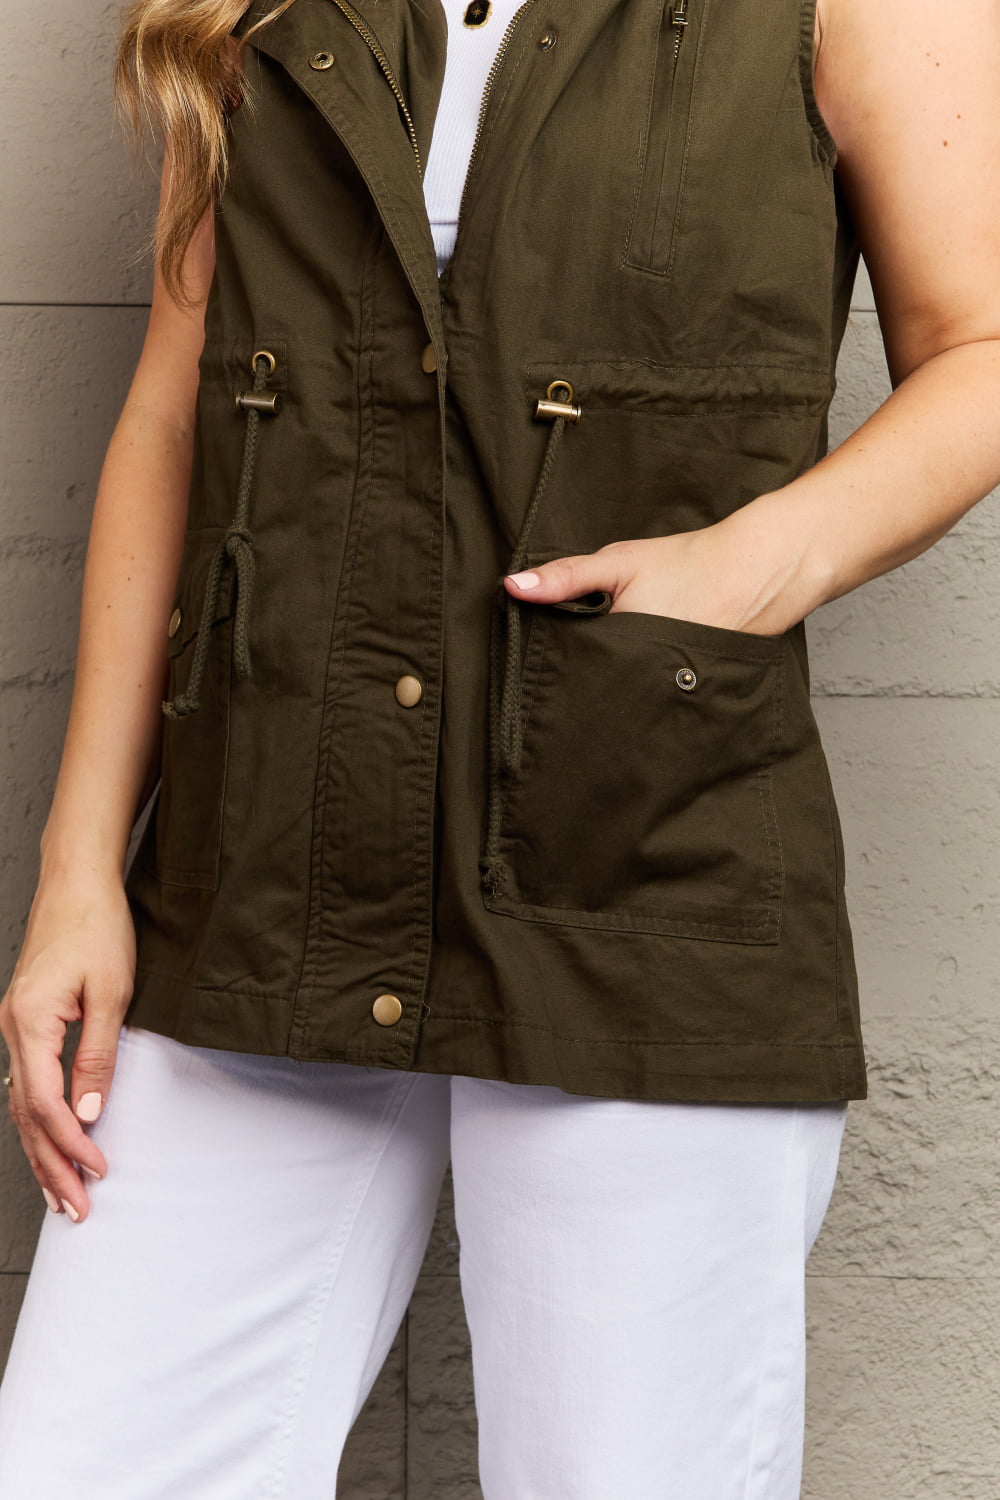 Zenana | More To Come Full Size Military Hooded Vest | us.meeeshop